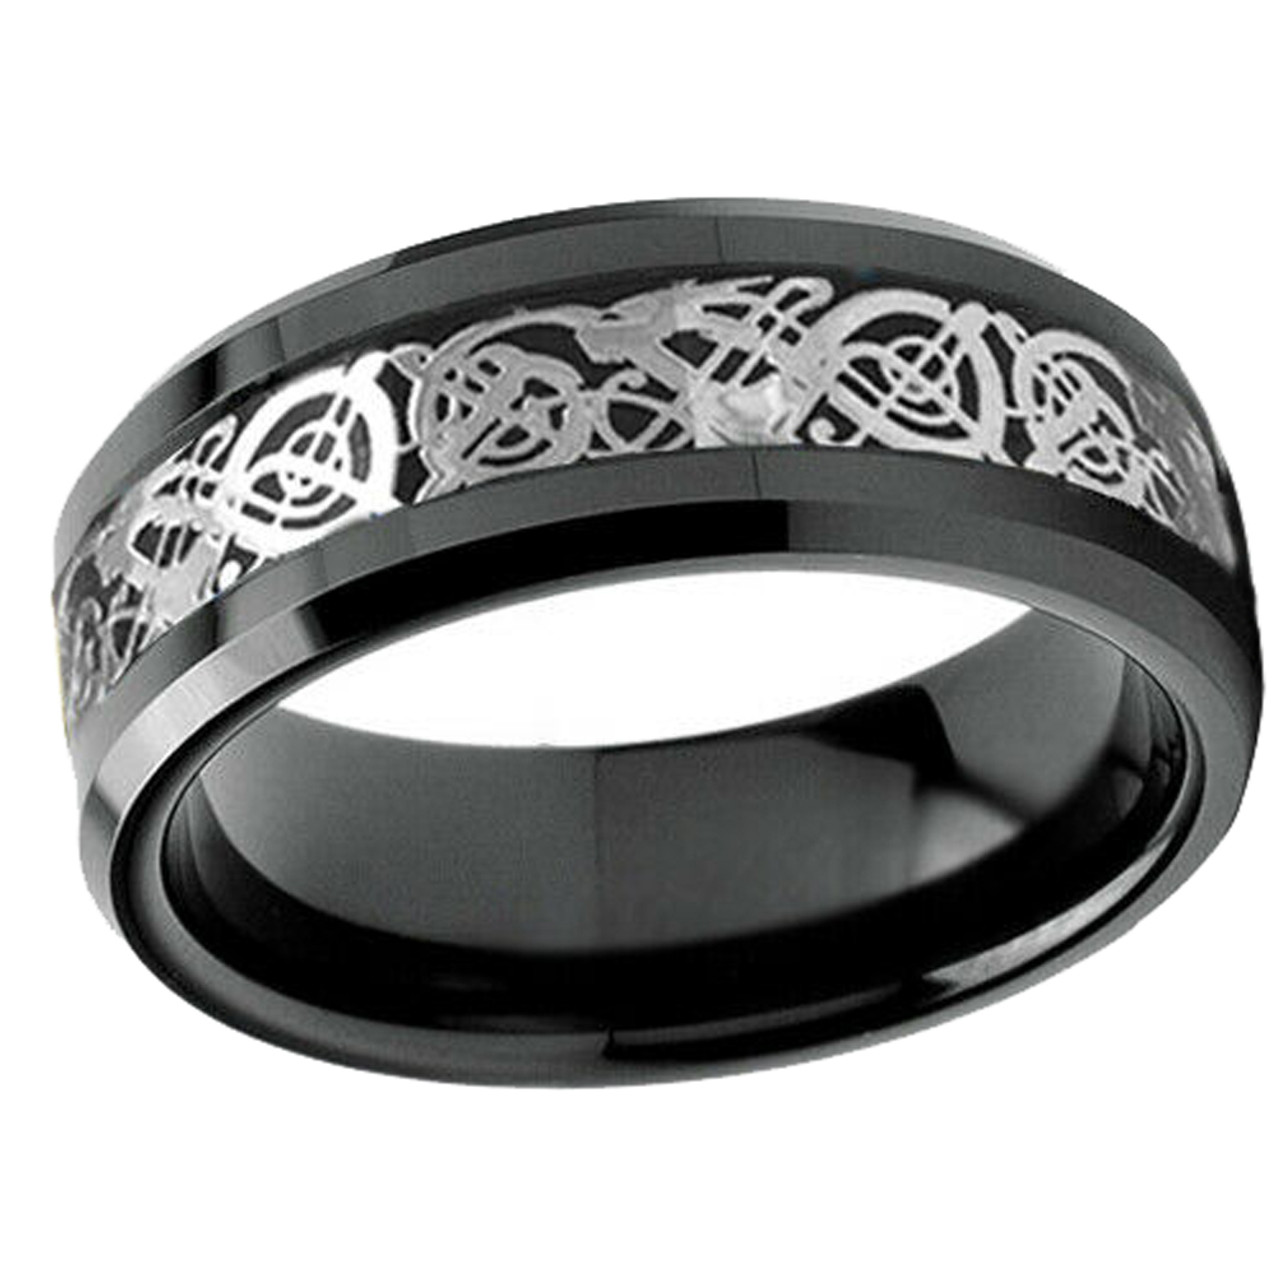 (8mm) Unisex or Men's Black and Silver Celtic Knot Tungsten Carbide Wedding Ring Band with Resin Inlay.